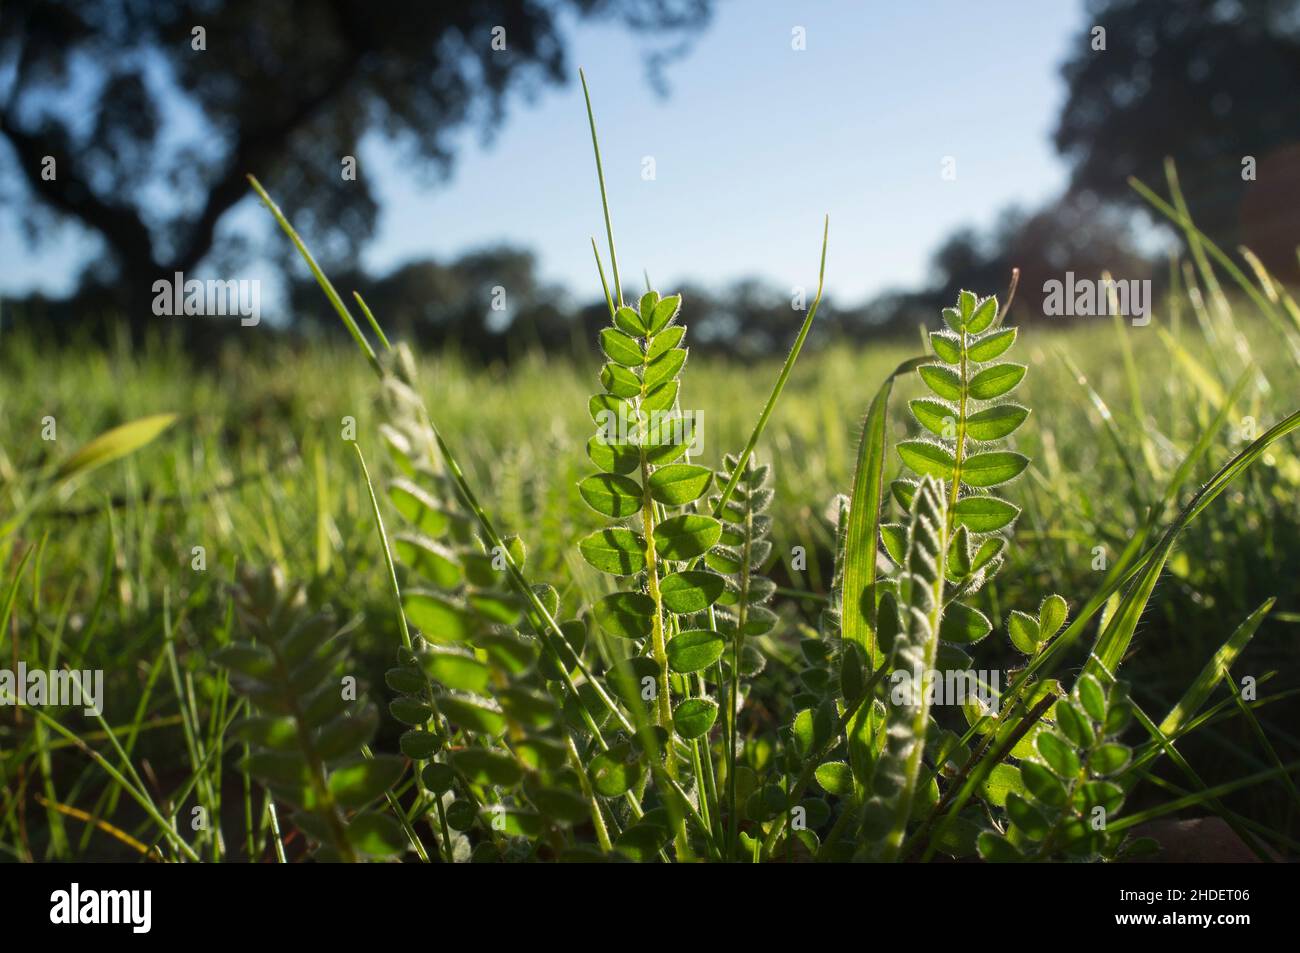 Astragalus growing in winter meadows of dehesa forest. Closeup Stock Photo